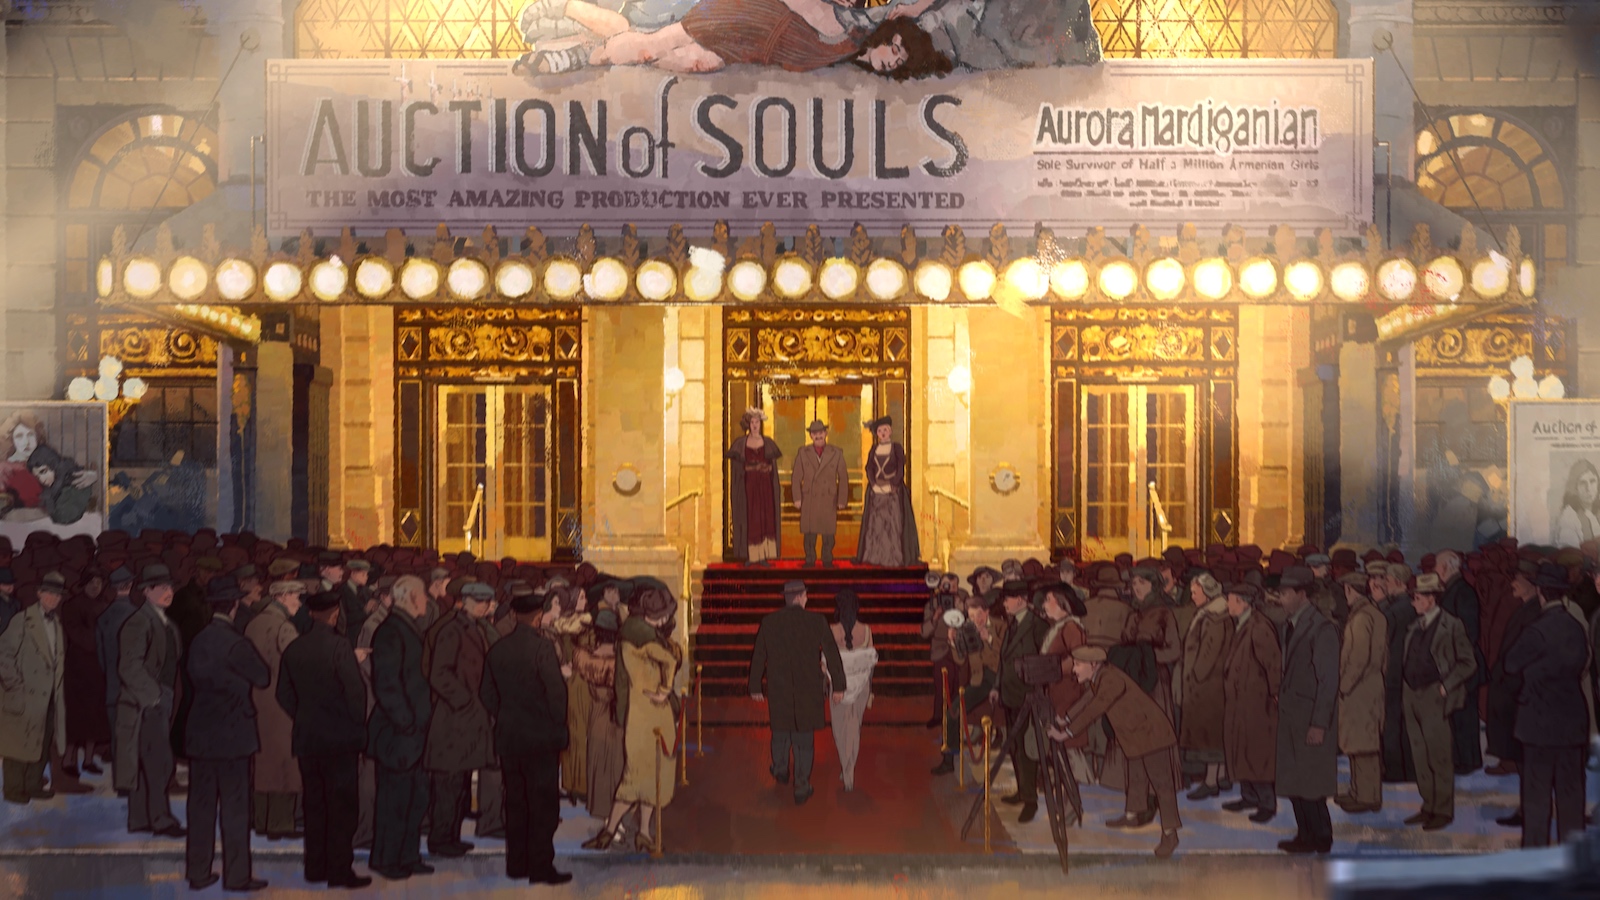 illustration of a movie premiere at the Plaza hotel with "Auction of Souls" in the marquee